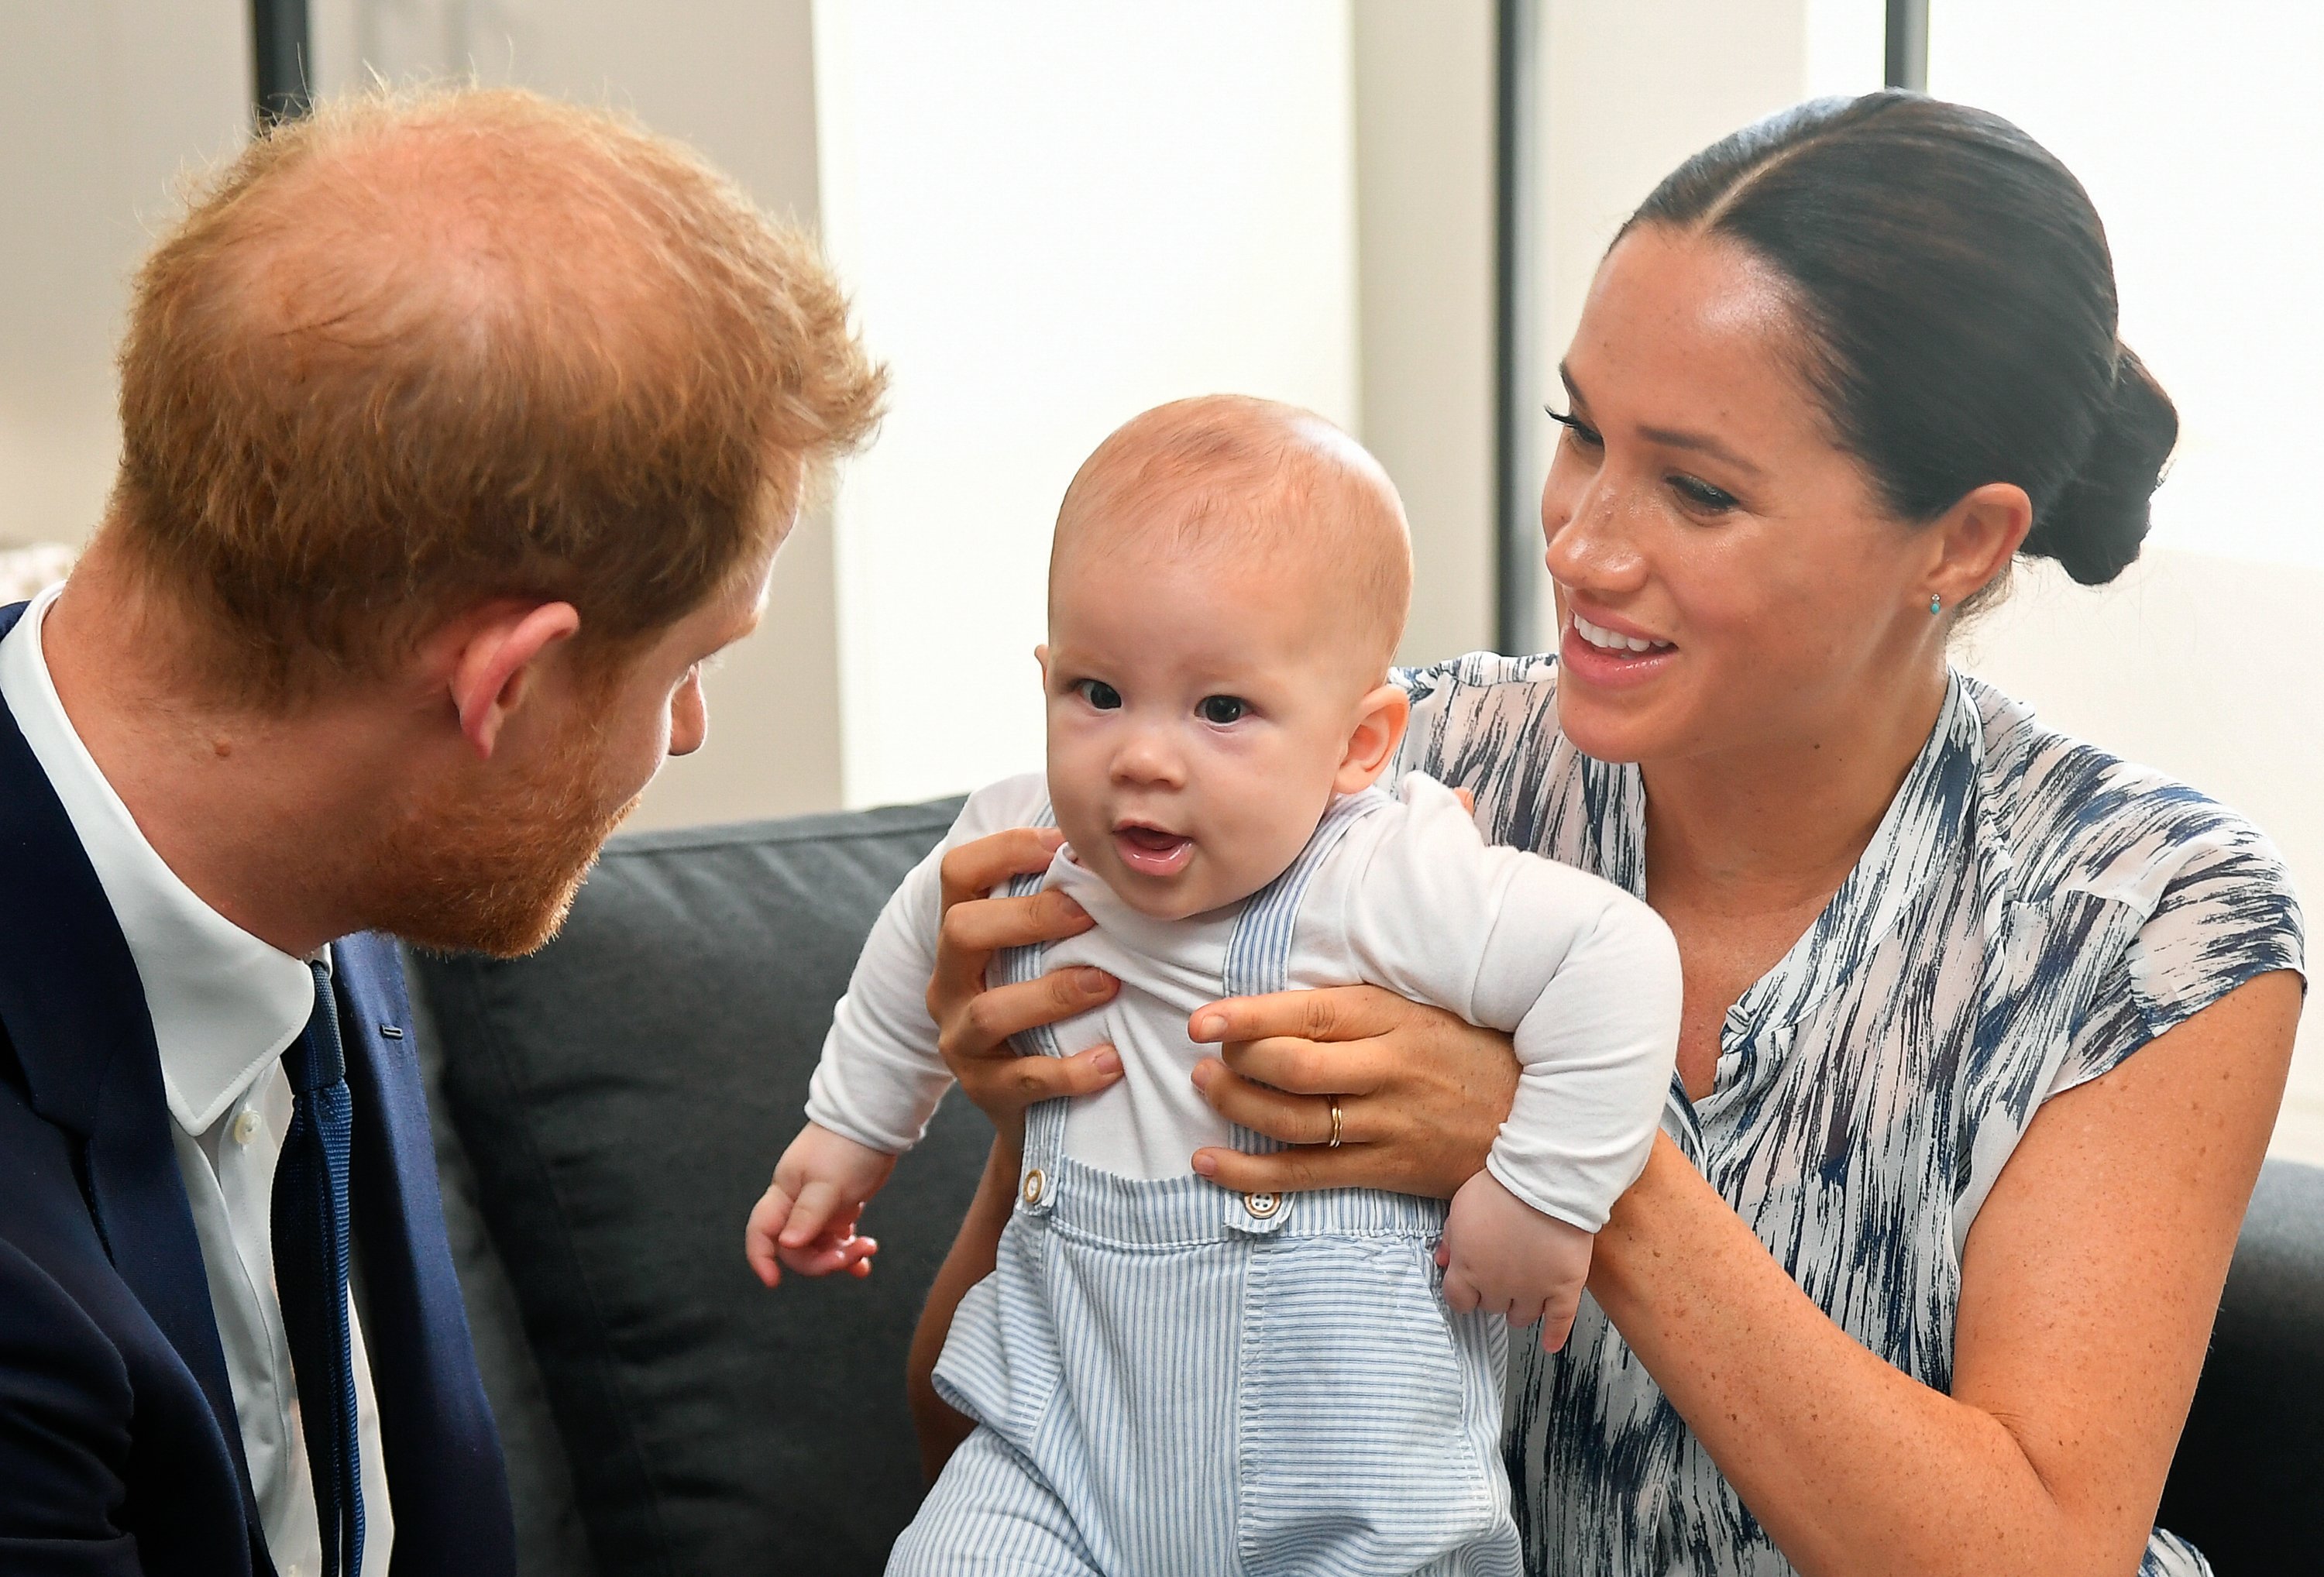 Prince Harry, Duchess Meghan, and baby Archie Mountbatten-Windsor at the Desmond & Leah Tutu Legacy Foundation during their royal tour of South Africa on September 25, 2019, in Cape Town. | Source: Getty Images